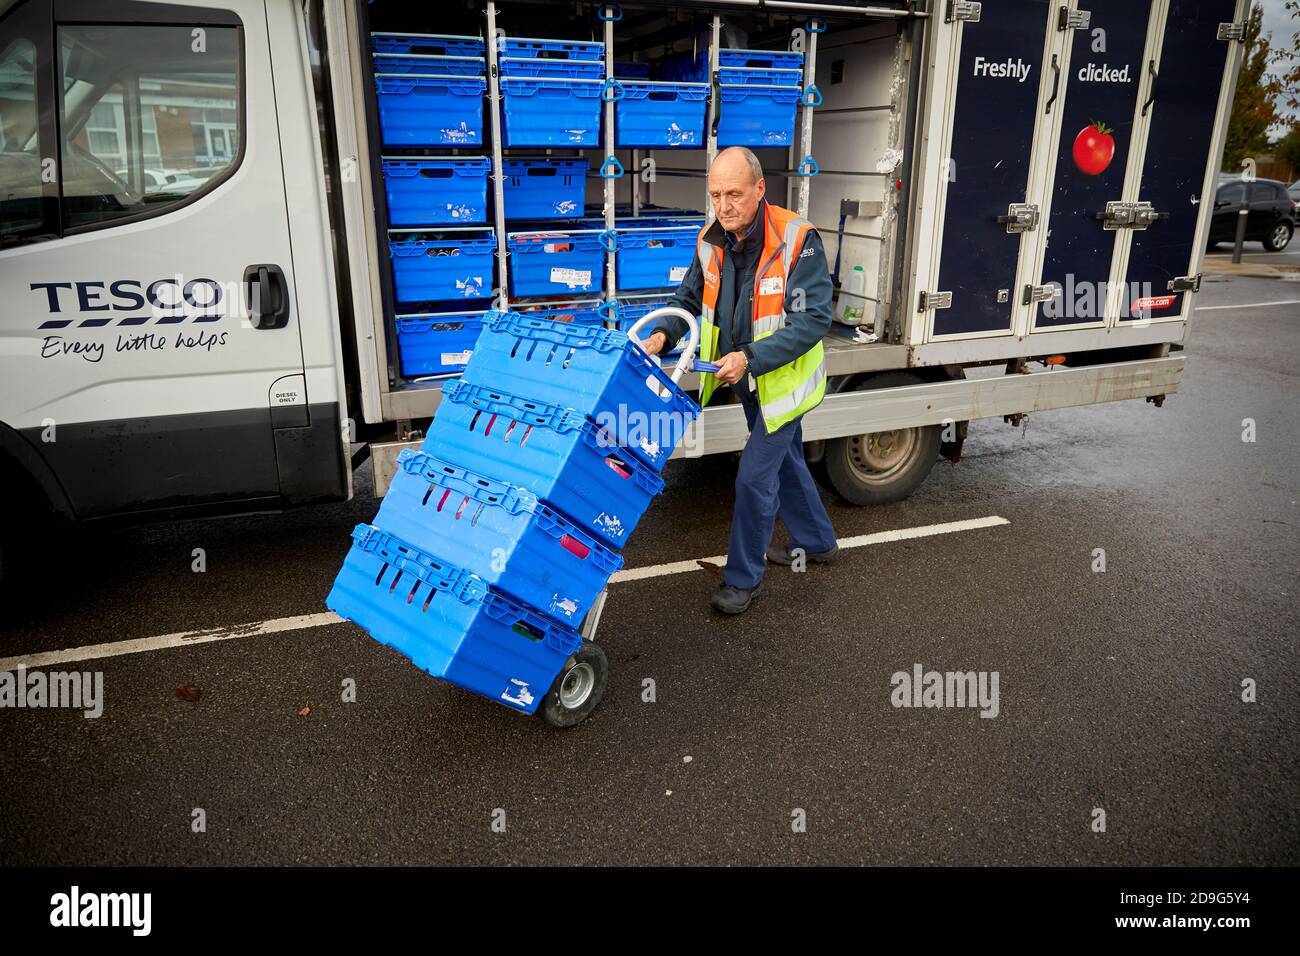 TESCO home delivery service using vans Stock Photo